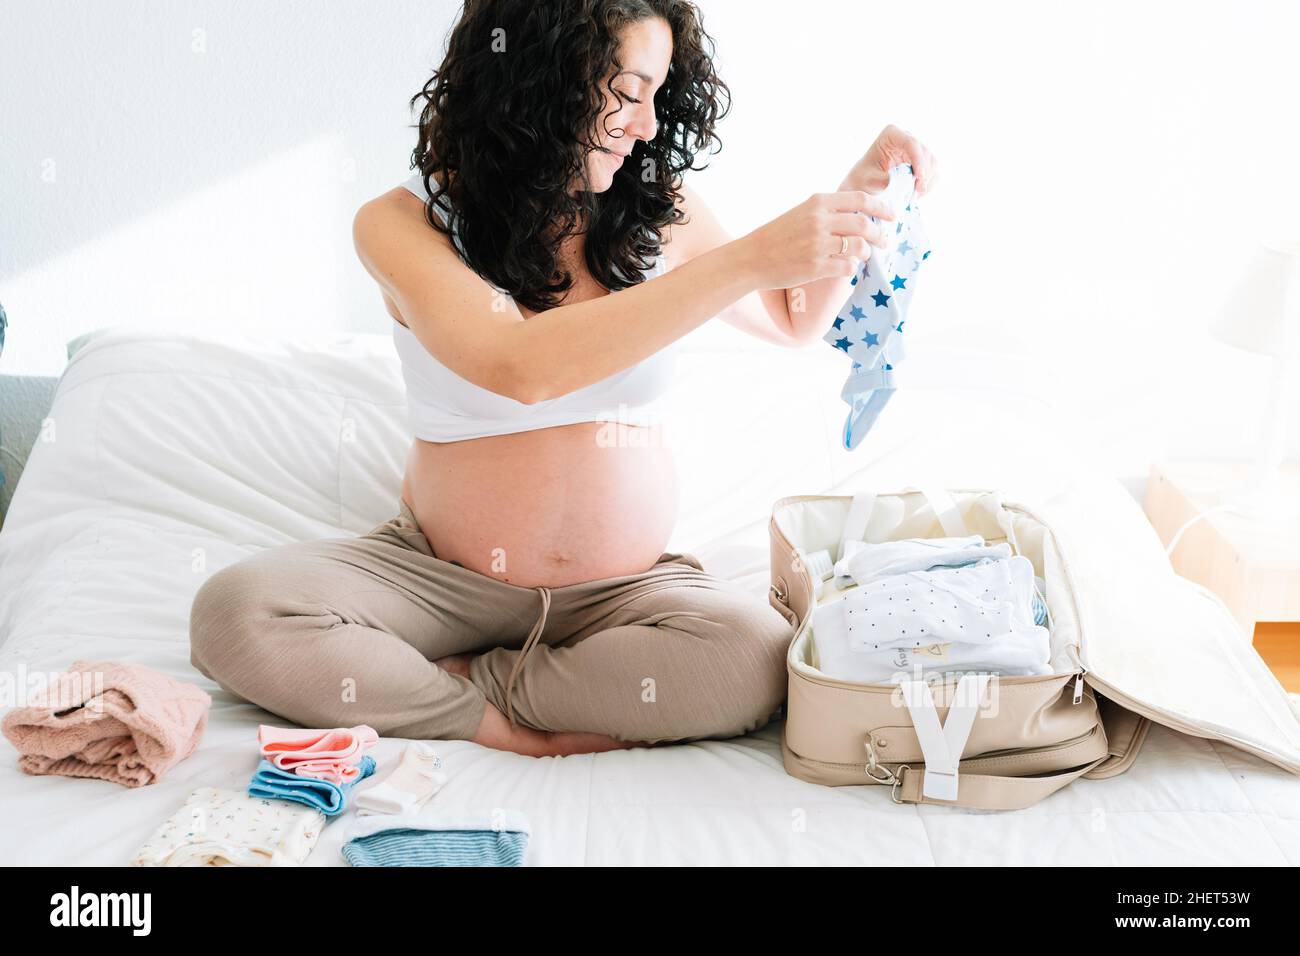 pregnant smiling young woman with curly hair preparing suitcase for hospital for the arrival of her newborn Stock Photo